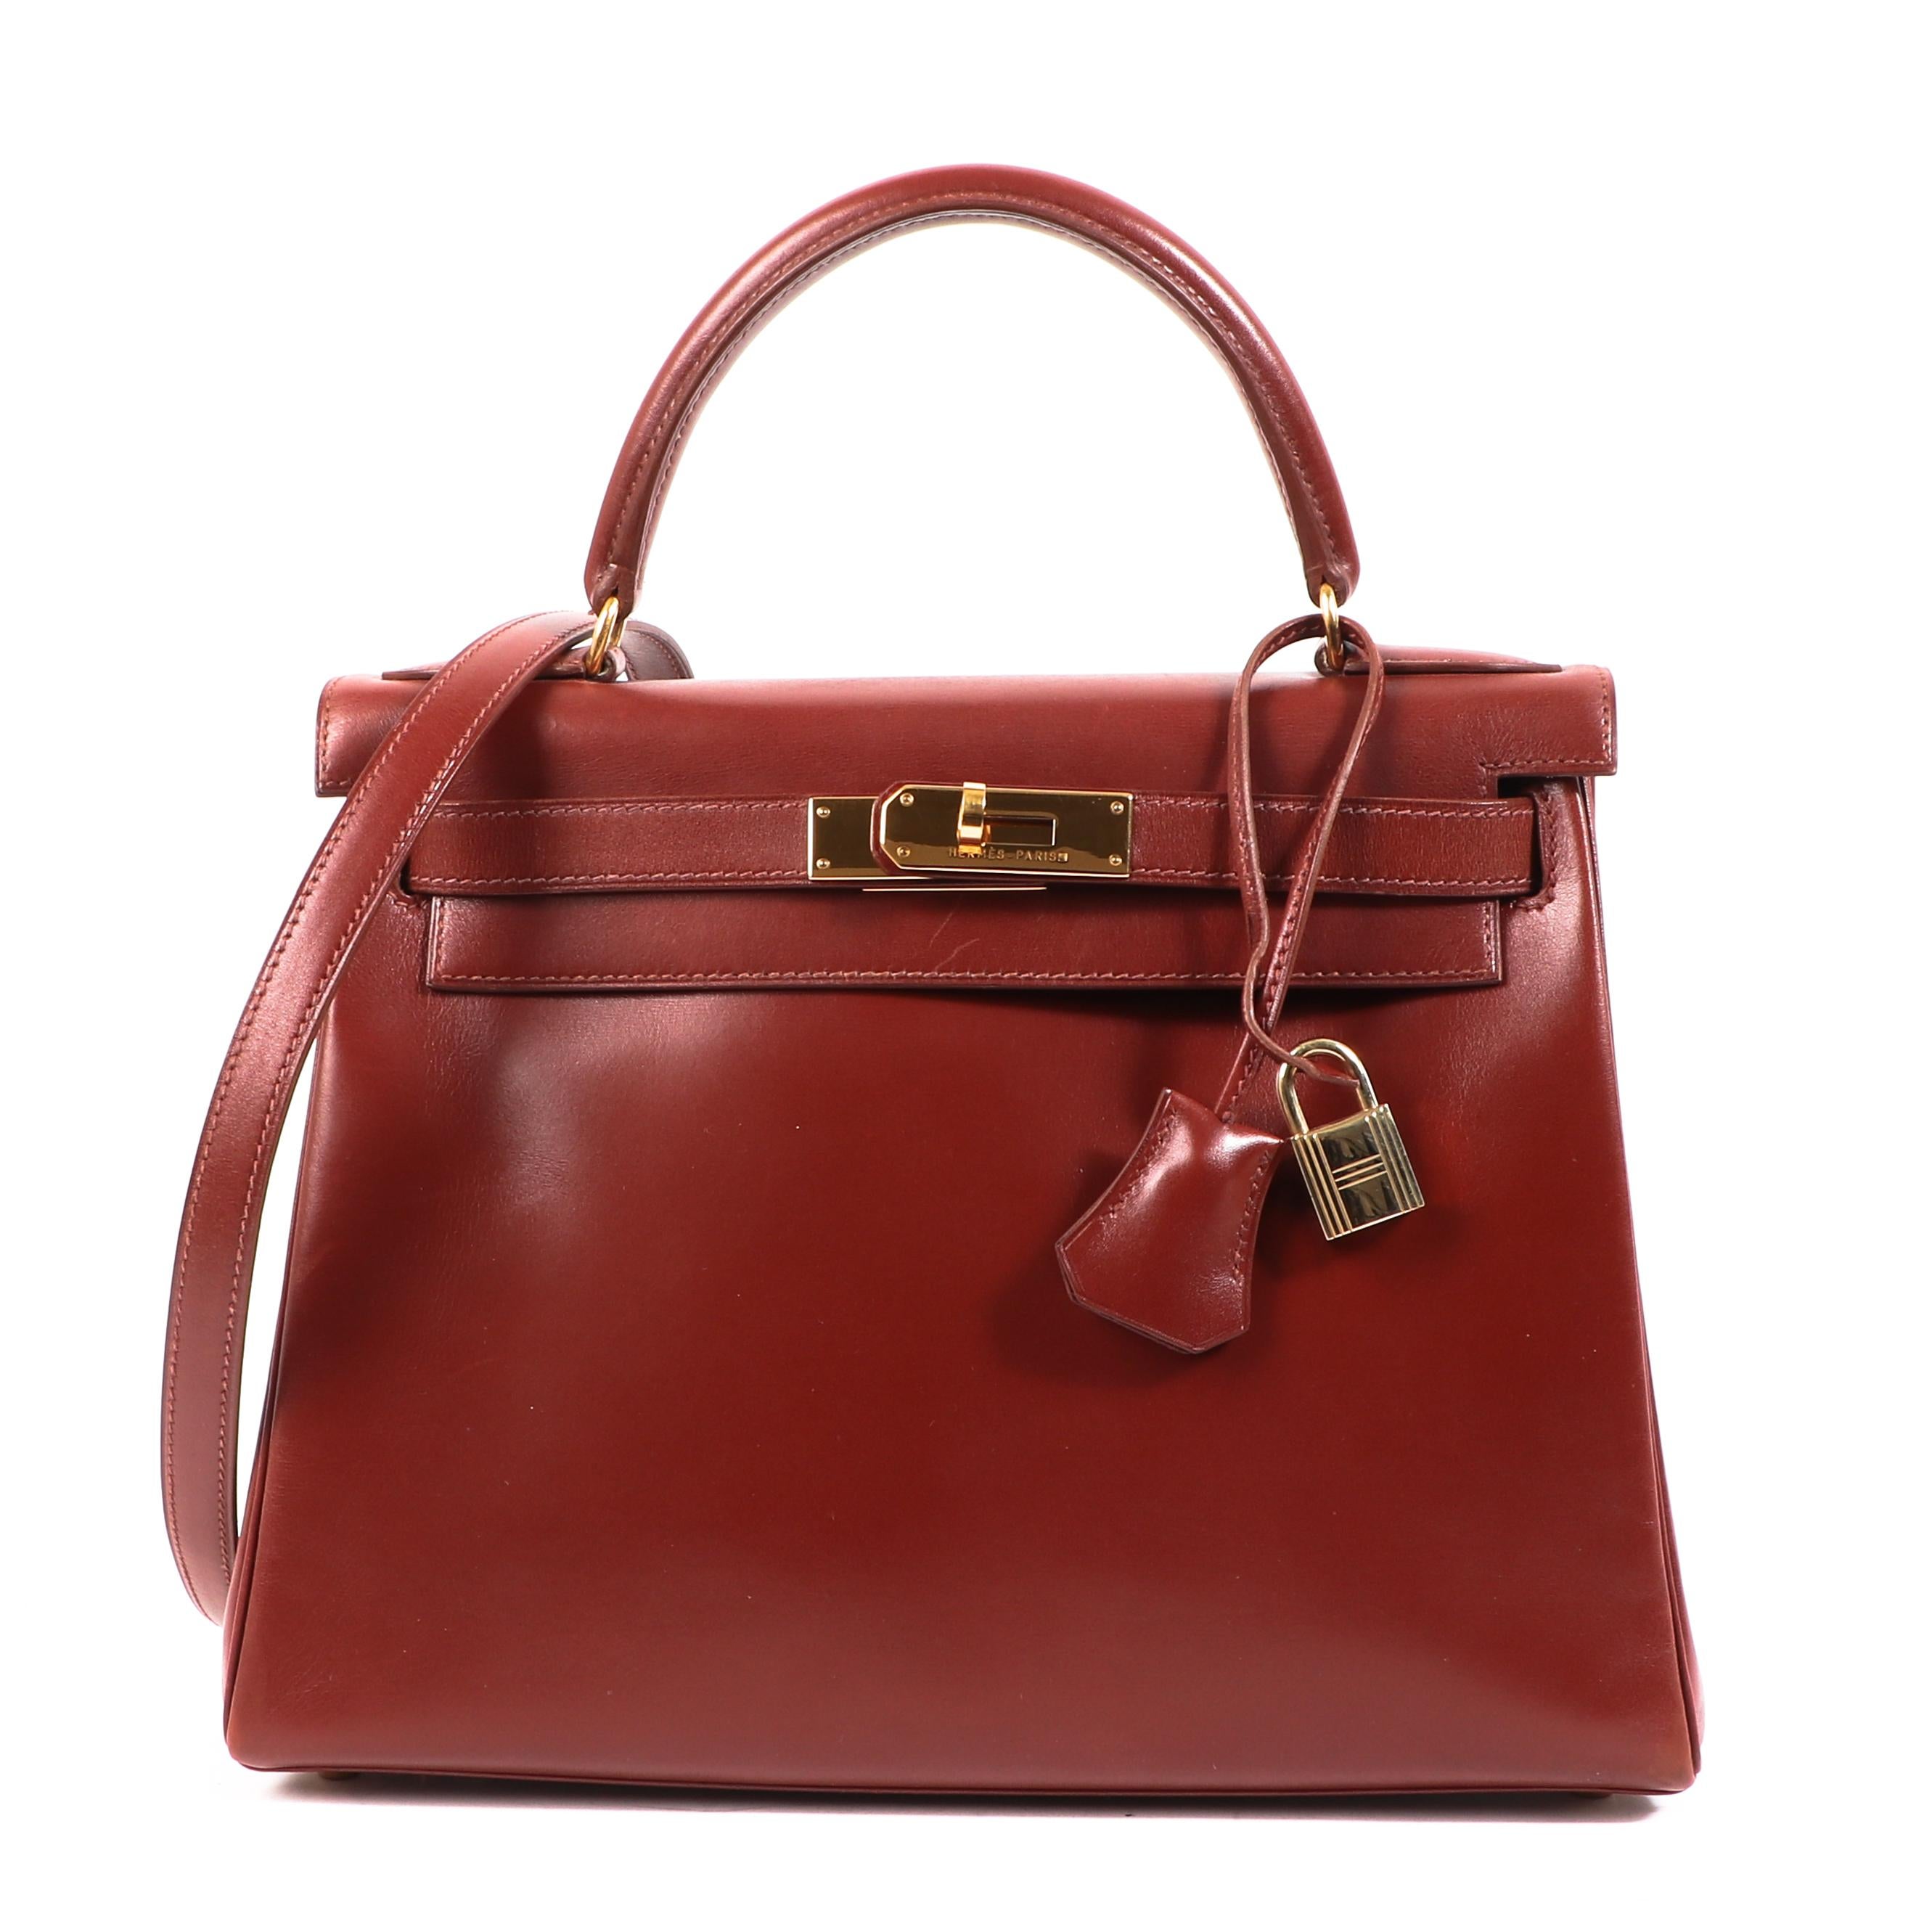 Hermès Vintage Kelly 28 Etrusque Box Gold Hardware

It's like fine wine, the Hermès Kelly bag gets better with age. This Kelly 32 in glossy Box leather is no exception.

The shiny, polished Box leather is one of the most popular leather kinds on